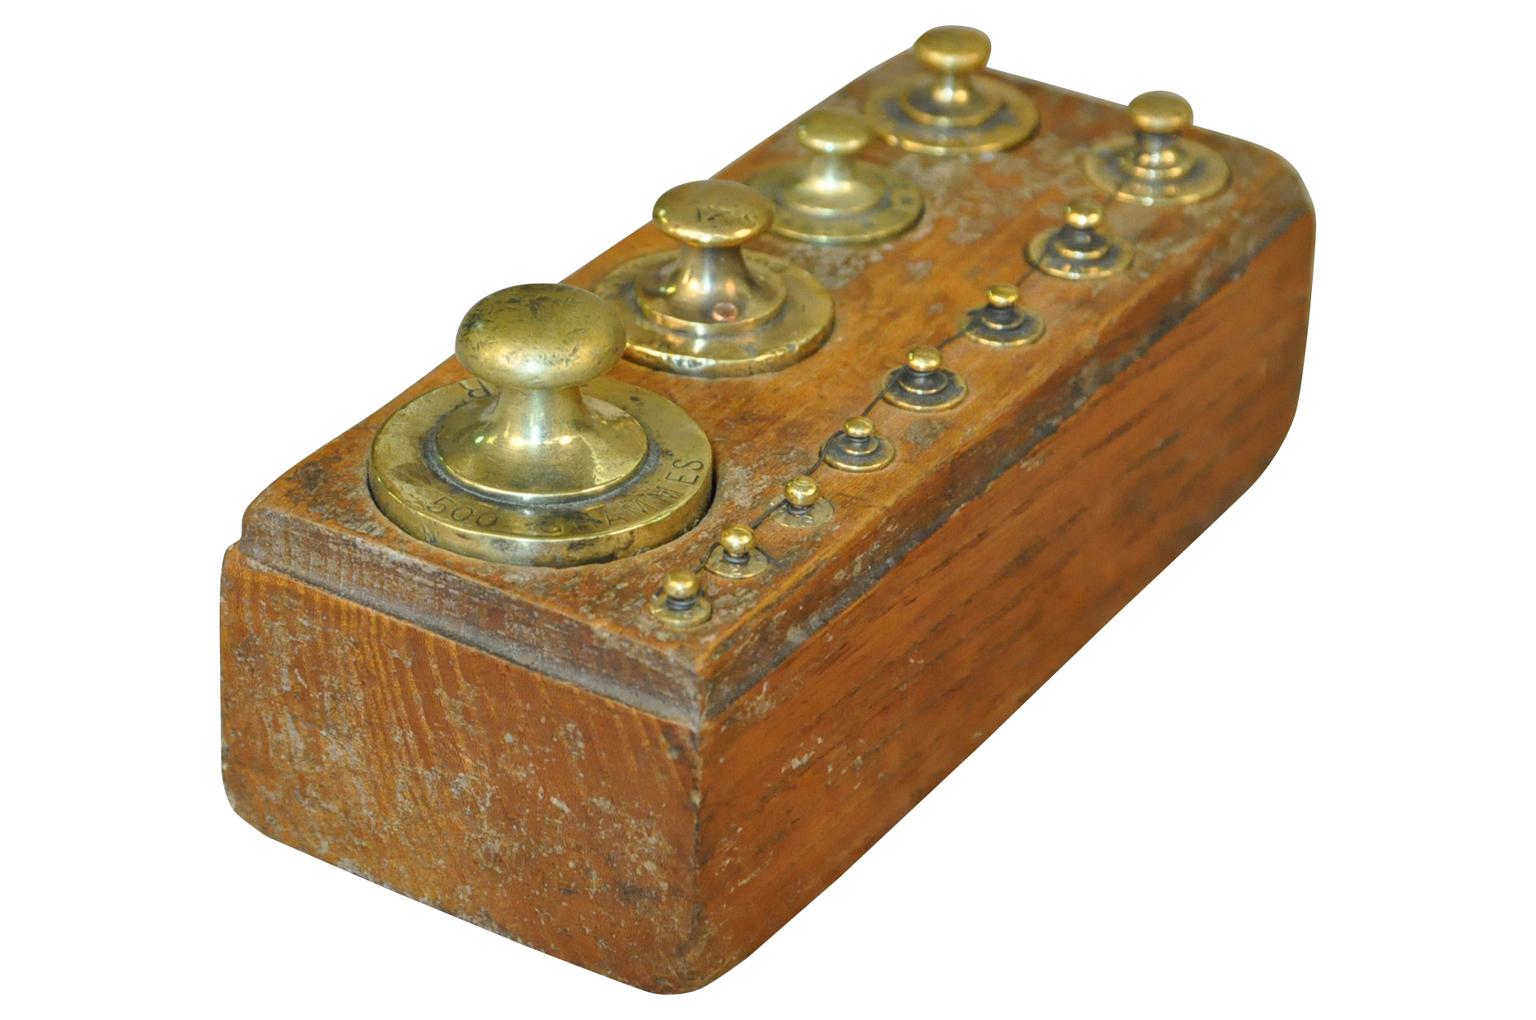 A later 19th century set of weights in brass housed in their wooden box. Weights such as these were used with different scales - balances - whether for apothecary, jewelers, confectionery, grocers. A charming accent piece for a kitchen island,